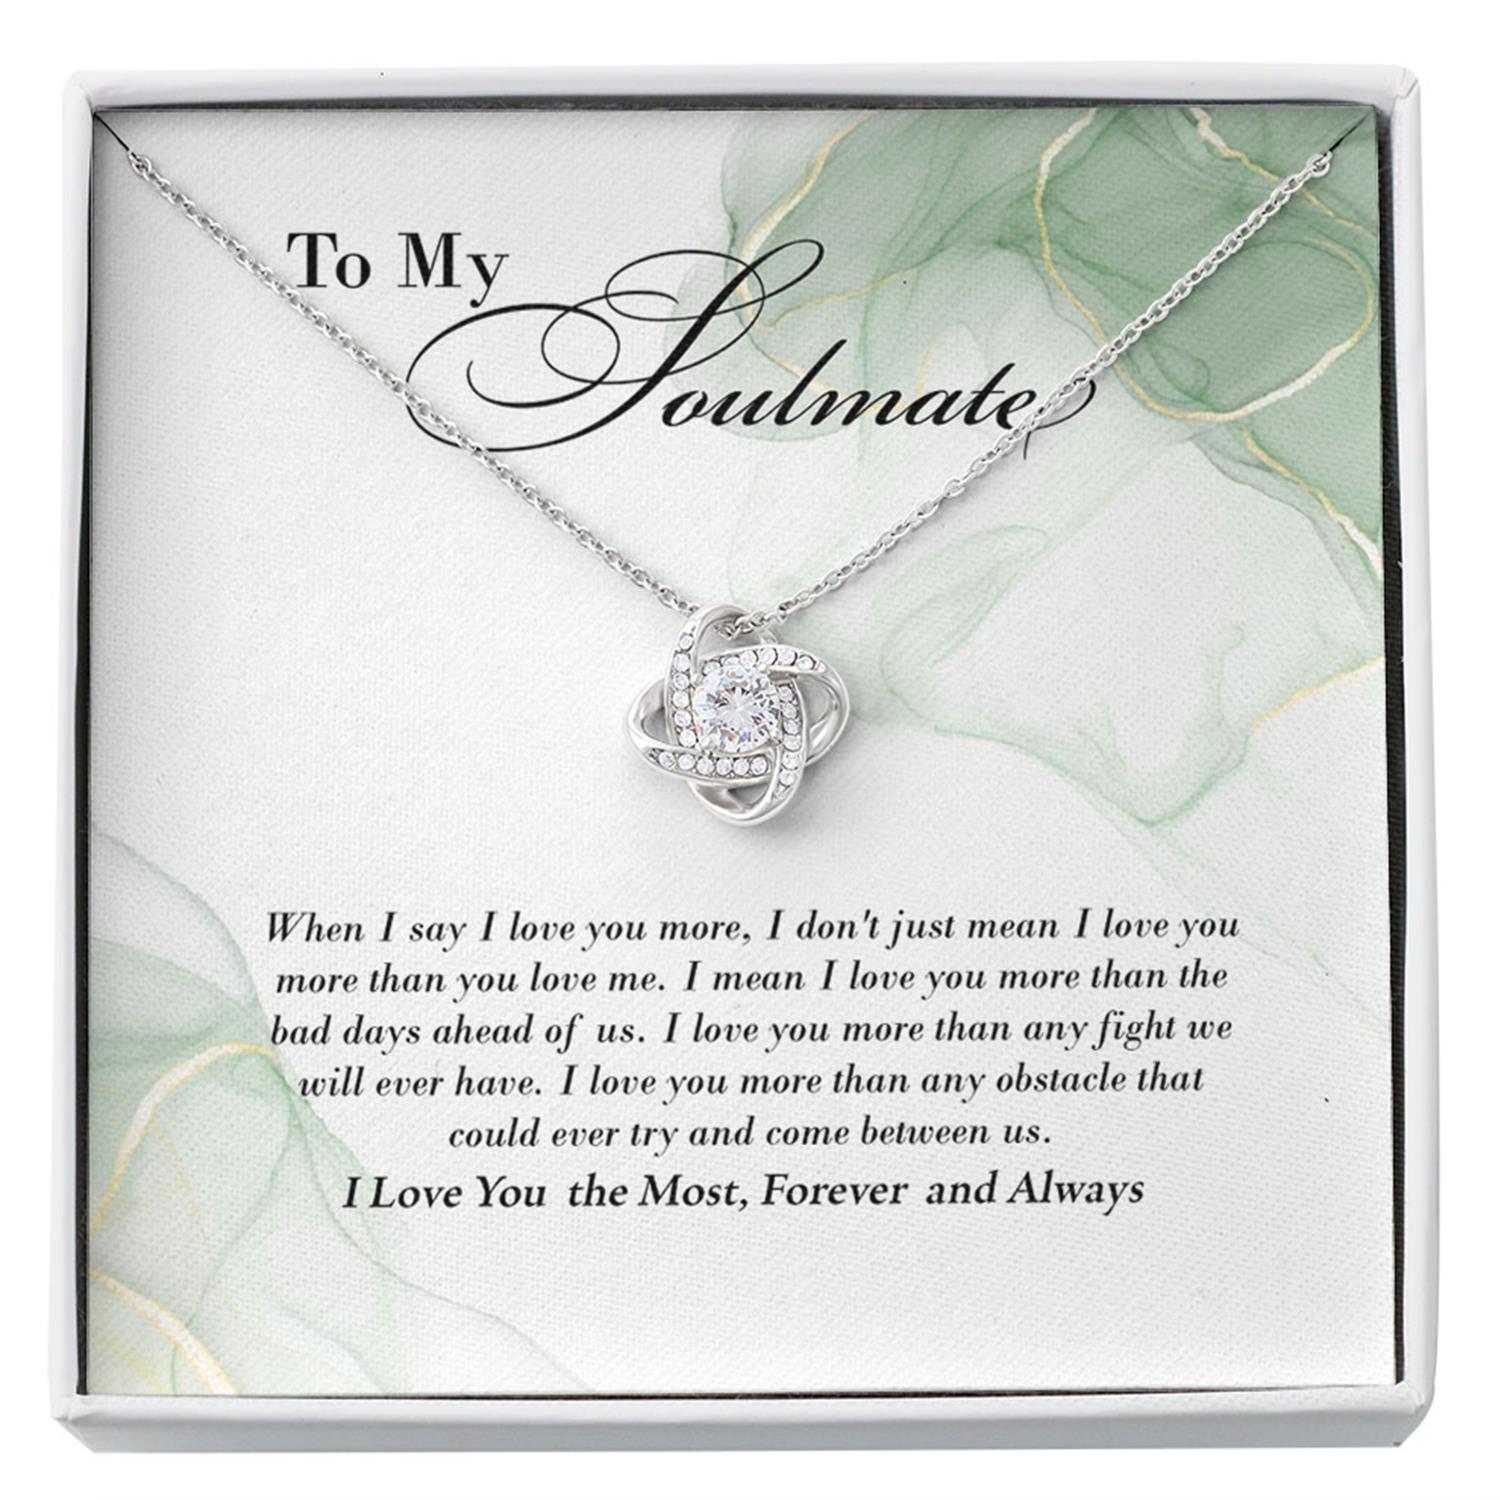 Girlfriend Necklace, Future Wife Necklace, To My Soulmate "I Love You The Most" Necklace Gift CLNCA26659 Custom Necklace